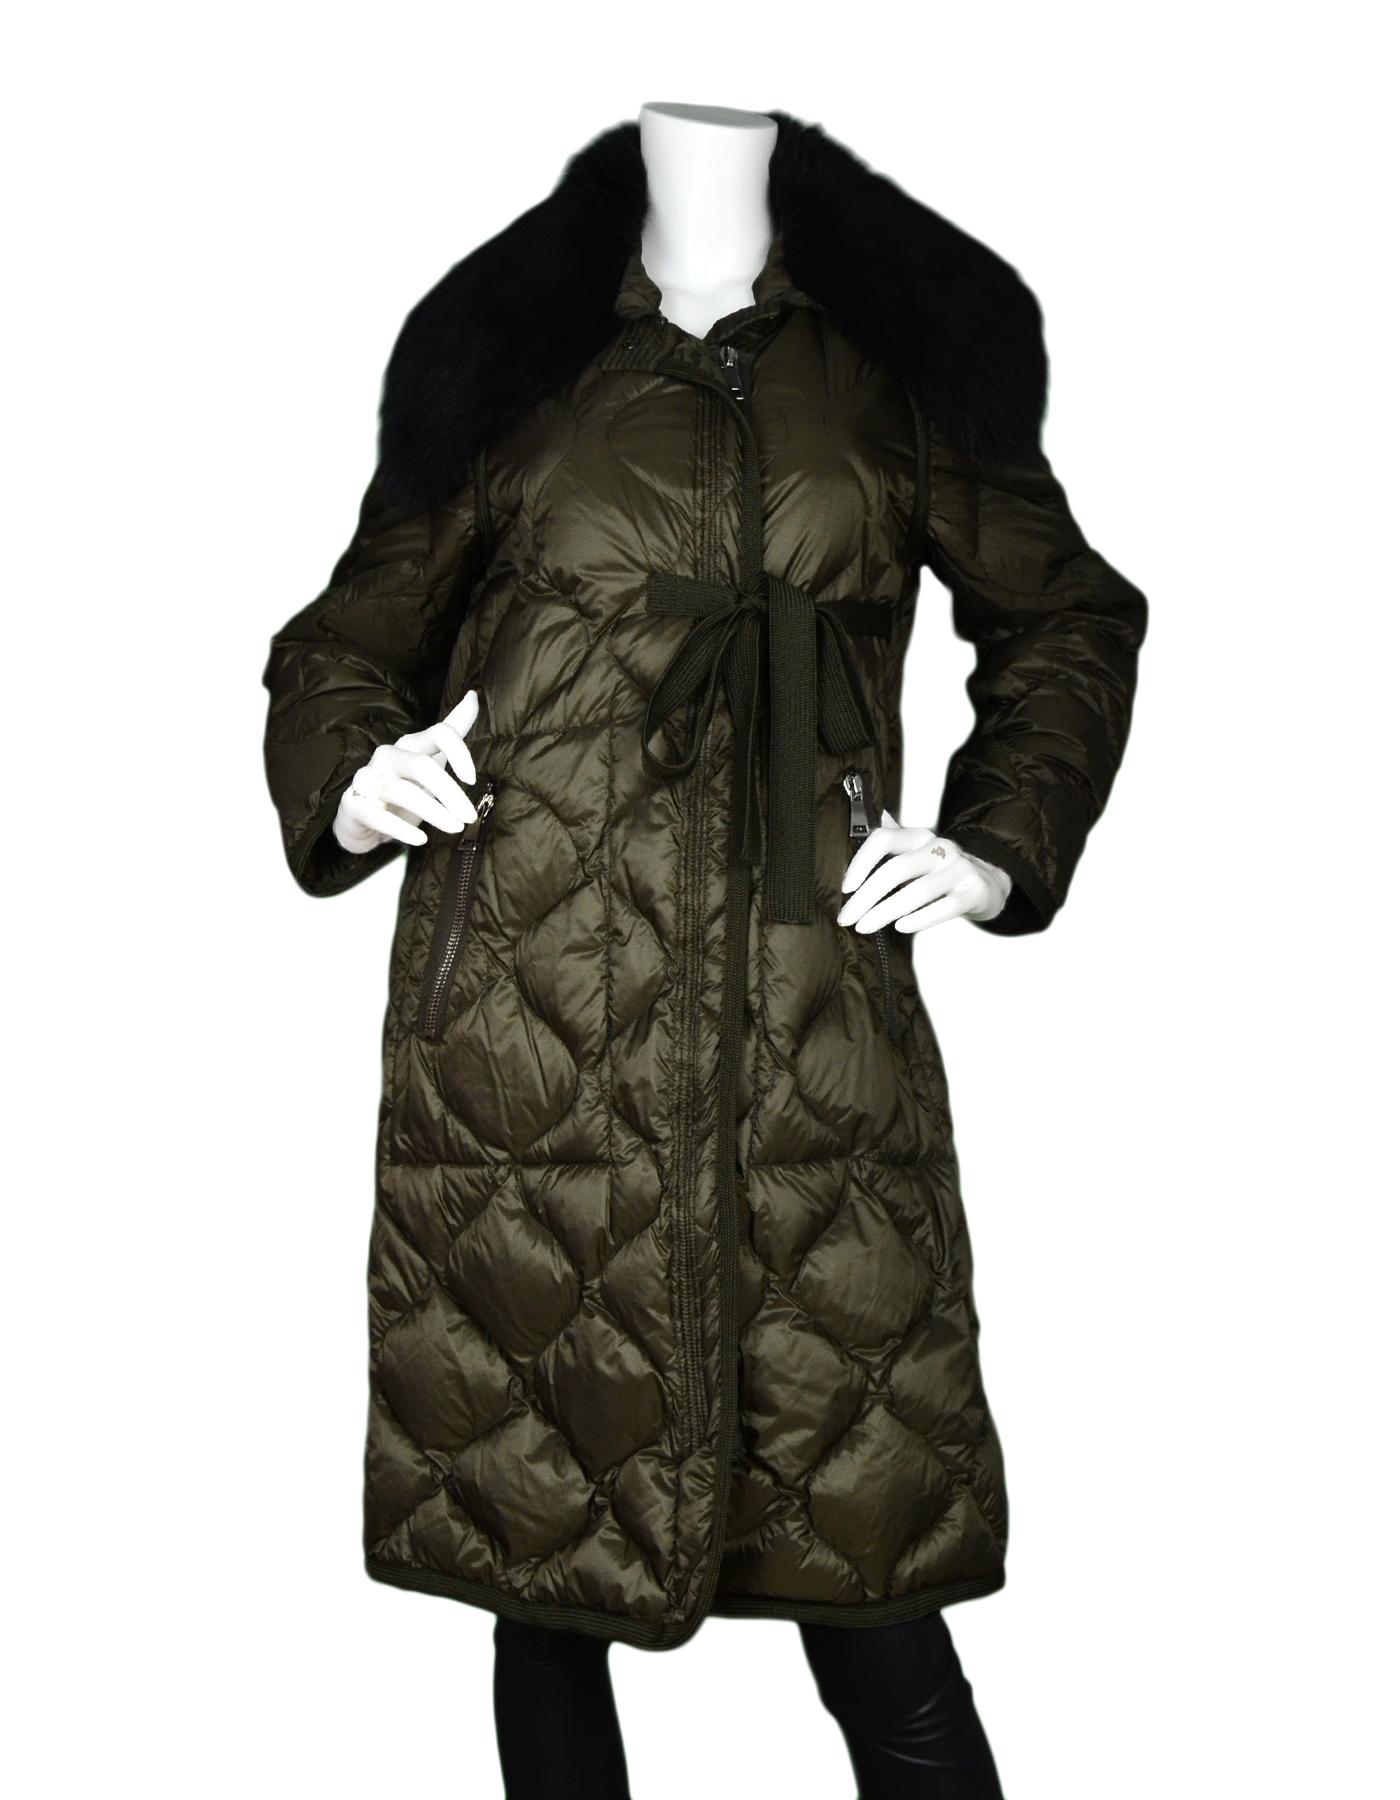 Moncler Olive Green Ceanothu Quilted Down Coat W/ Removable Fur Collar Sz 1 (Small)

Made In:  Romania
Color: Olive green
Materials: 100% nylon
Lining: 100% nylon
Opening/Closure: Two way front zipper
Overall Condition: Excellent pre-owned condition